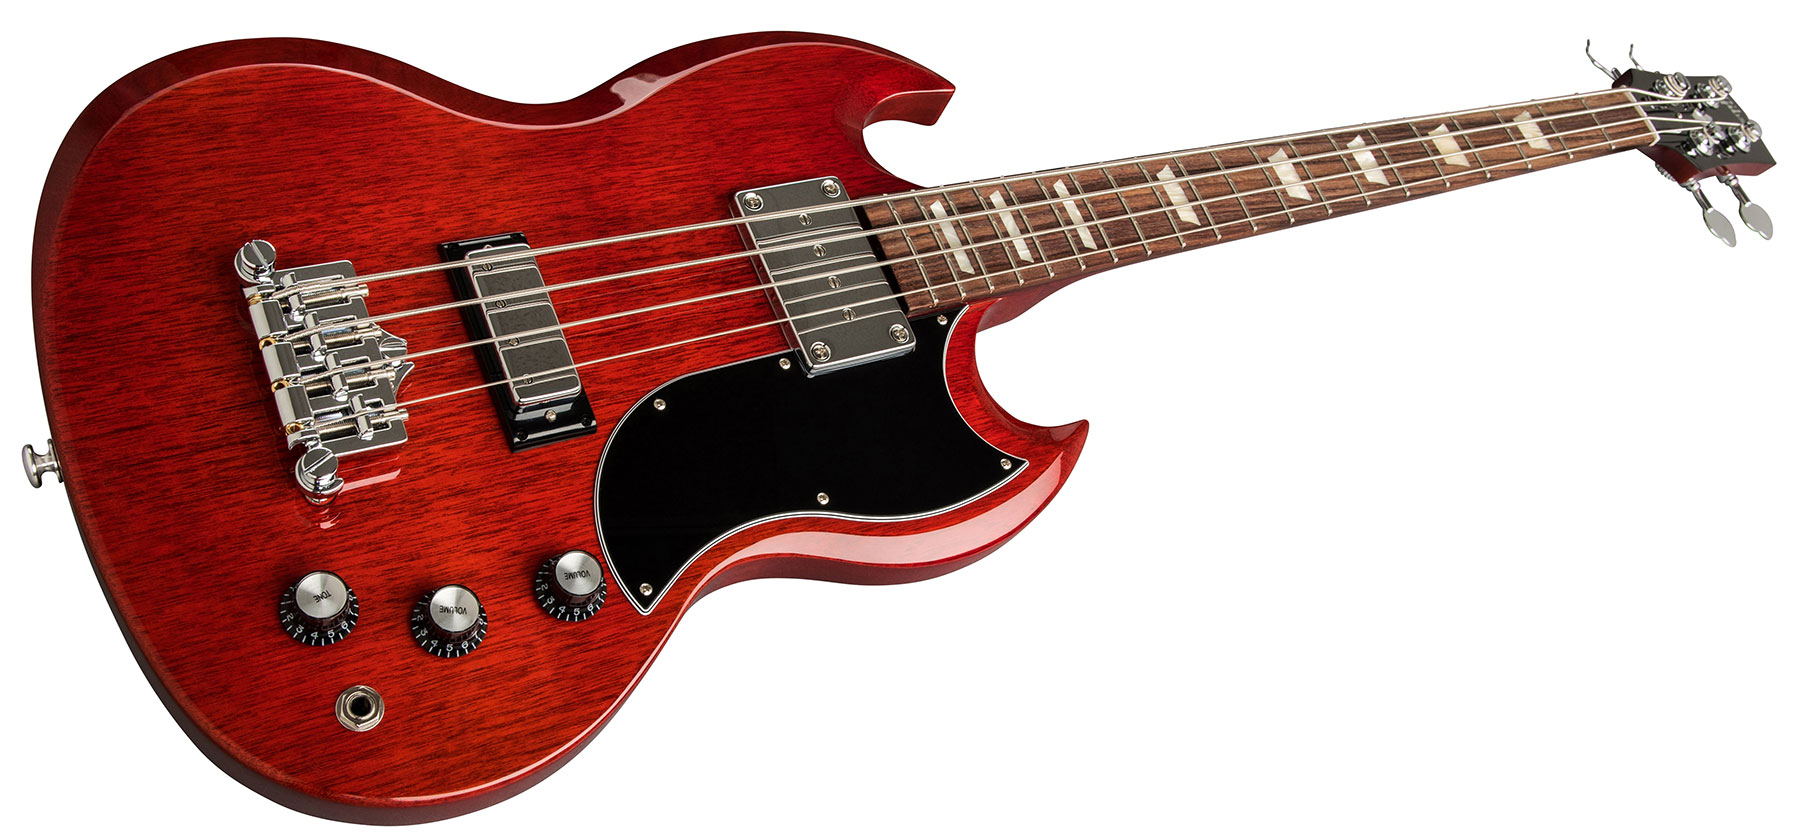 Gibson Sg Standard Bass - Heritage Cherry - Solid body electric bass - Variation 2